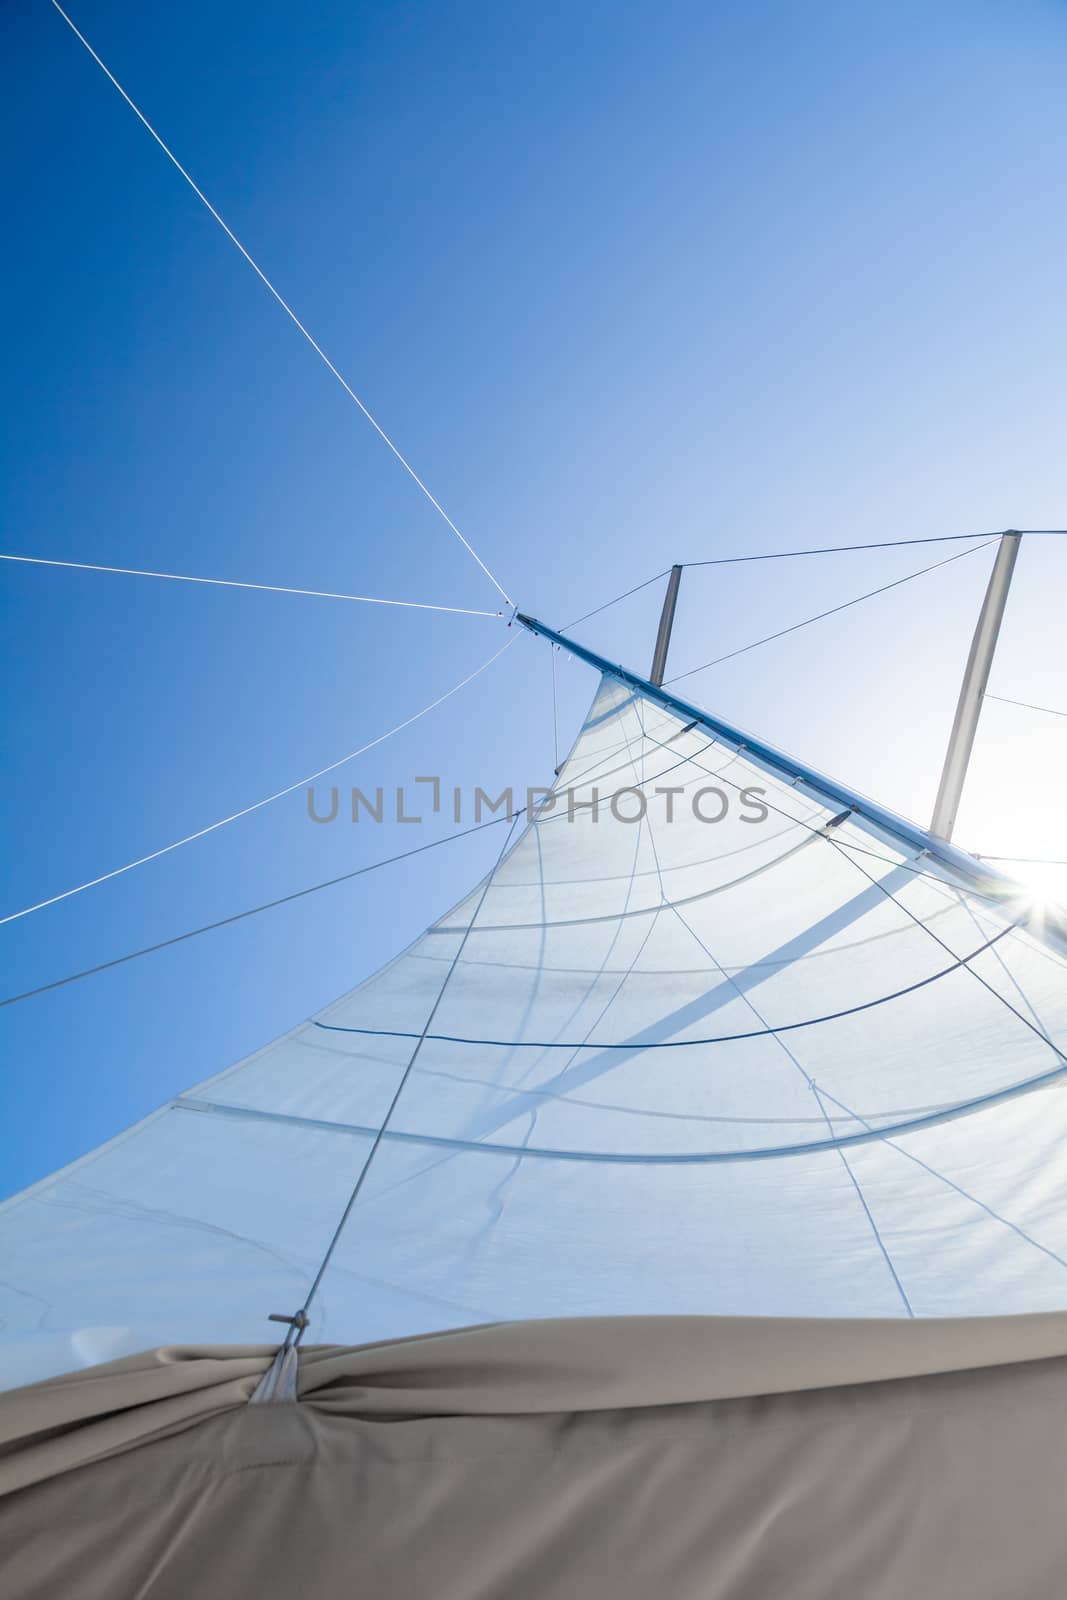 Sailing boat sails background by magann